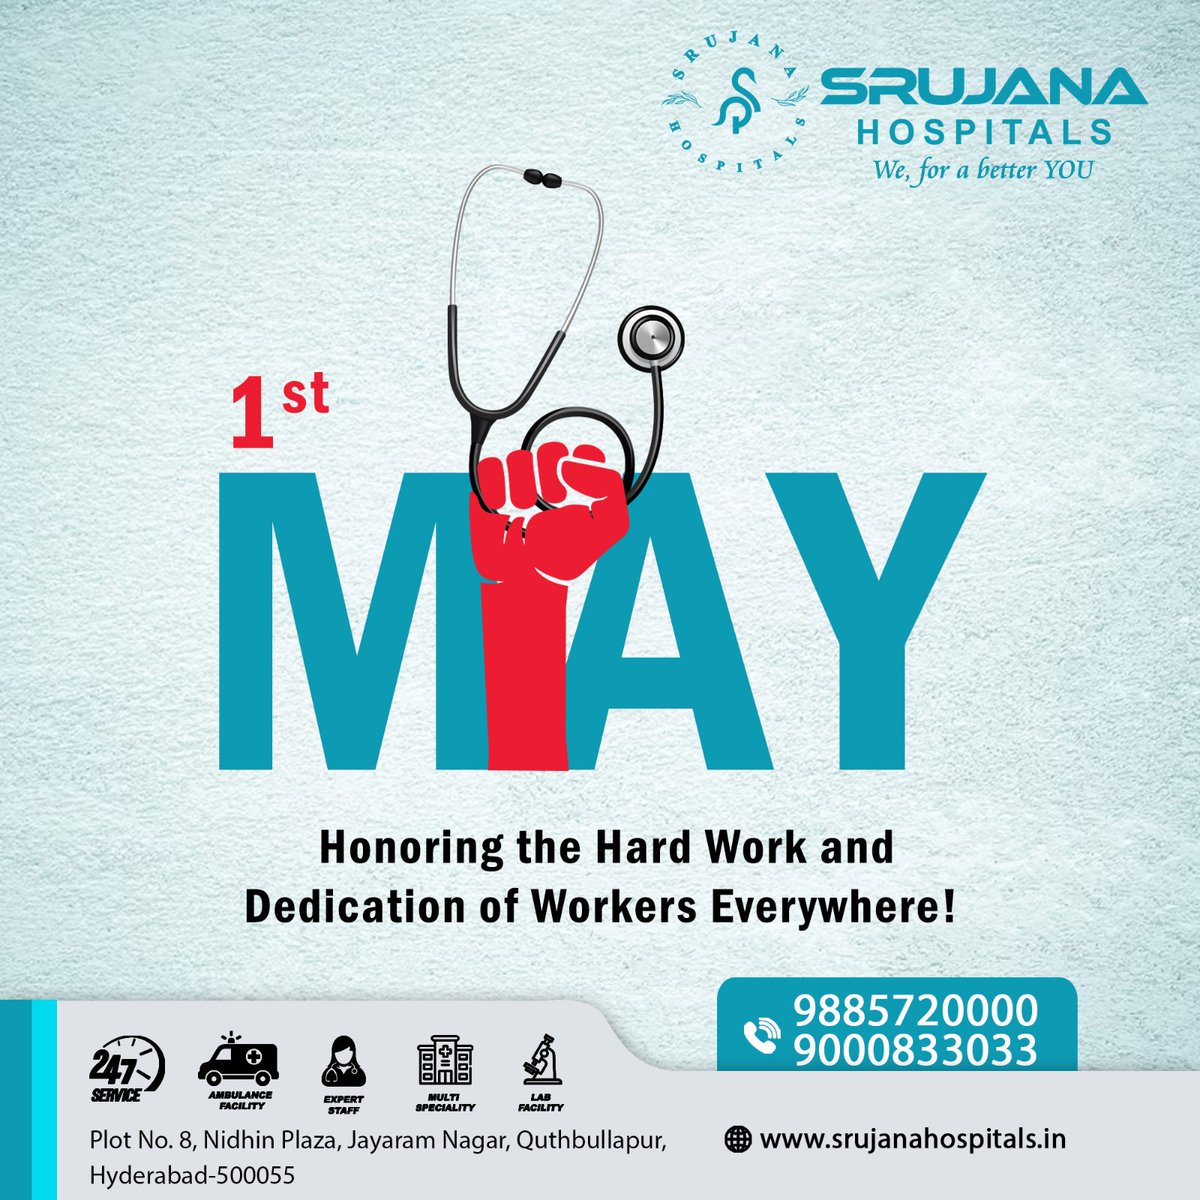 Let's honor the spirit of hard work and dedication that drives progress. Happy Labor Day!

#LabourDay #HappyLabourDay #WorkersRights #LabourMovement #MayDay #Solidarity #FairWages #Union #WorkersDay #LabourRights #LabourUnion #Srujanahospitals